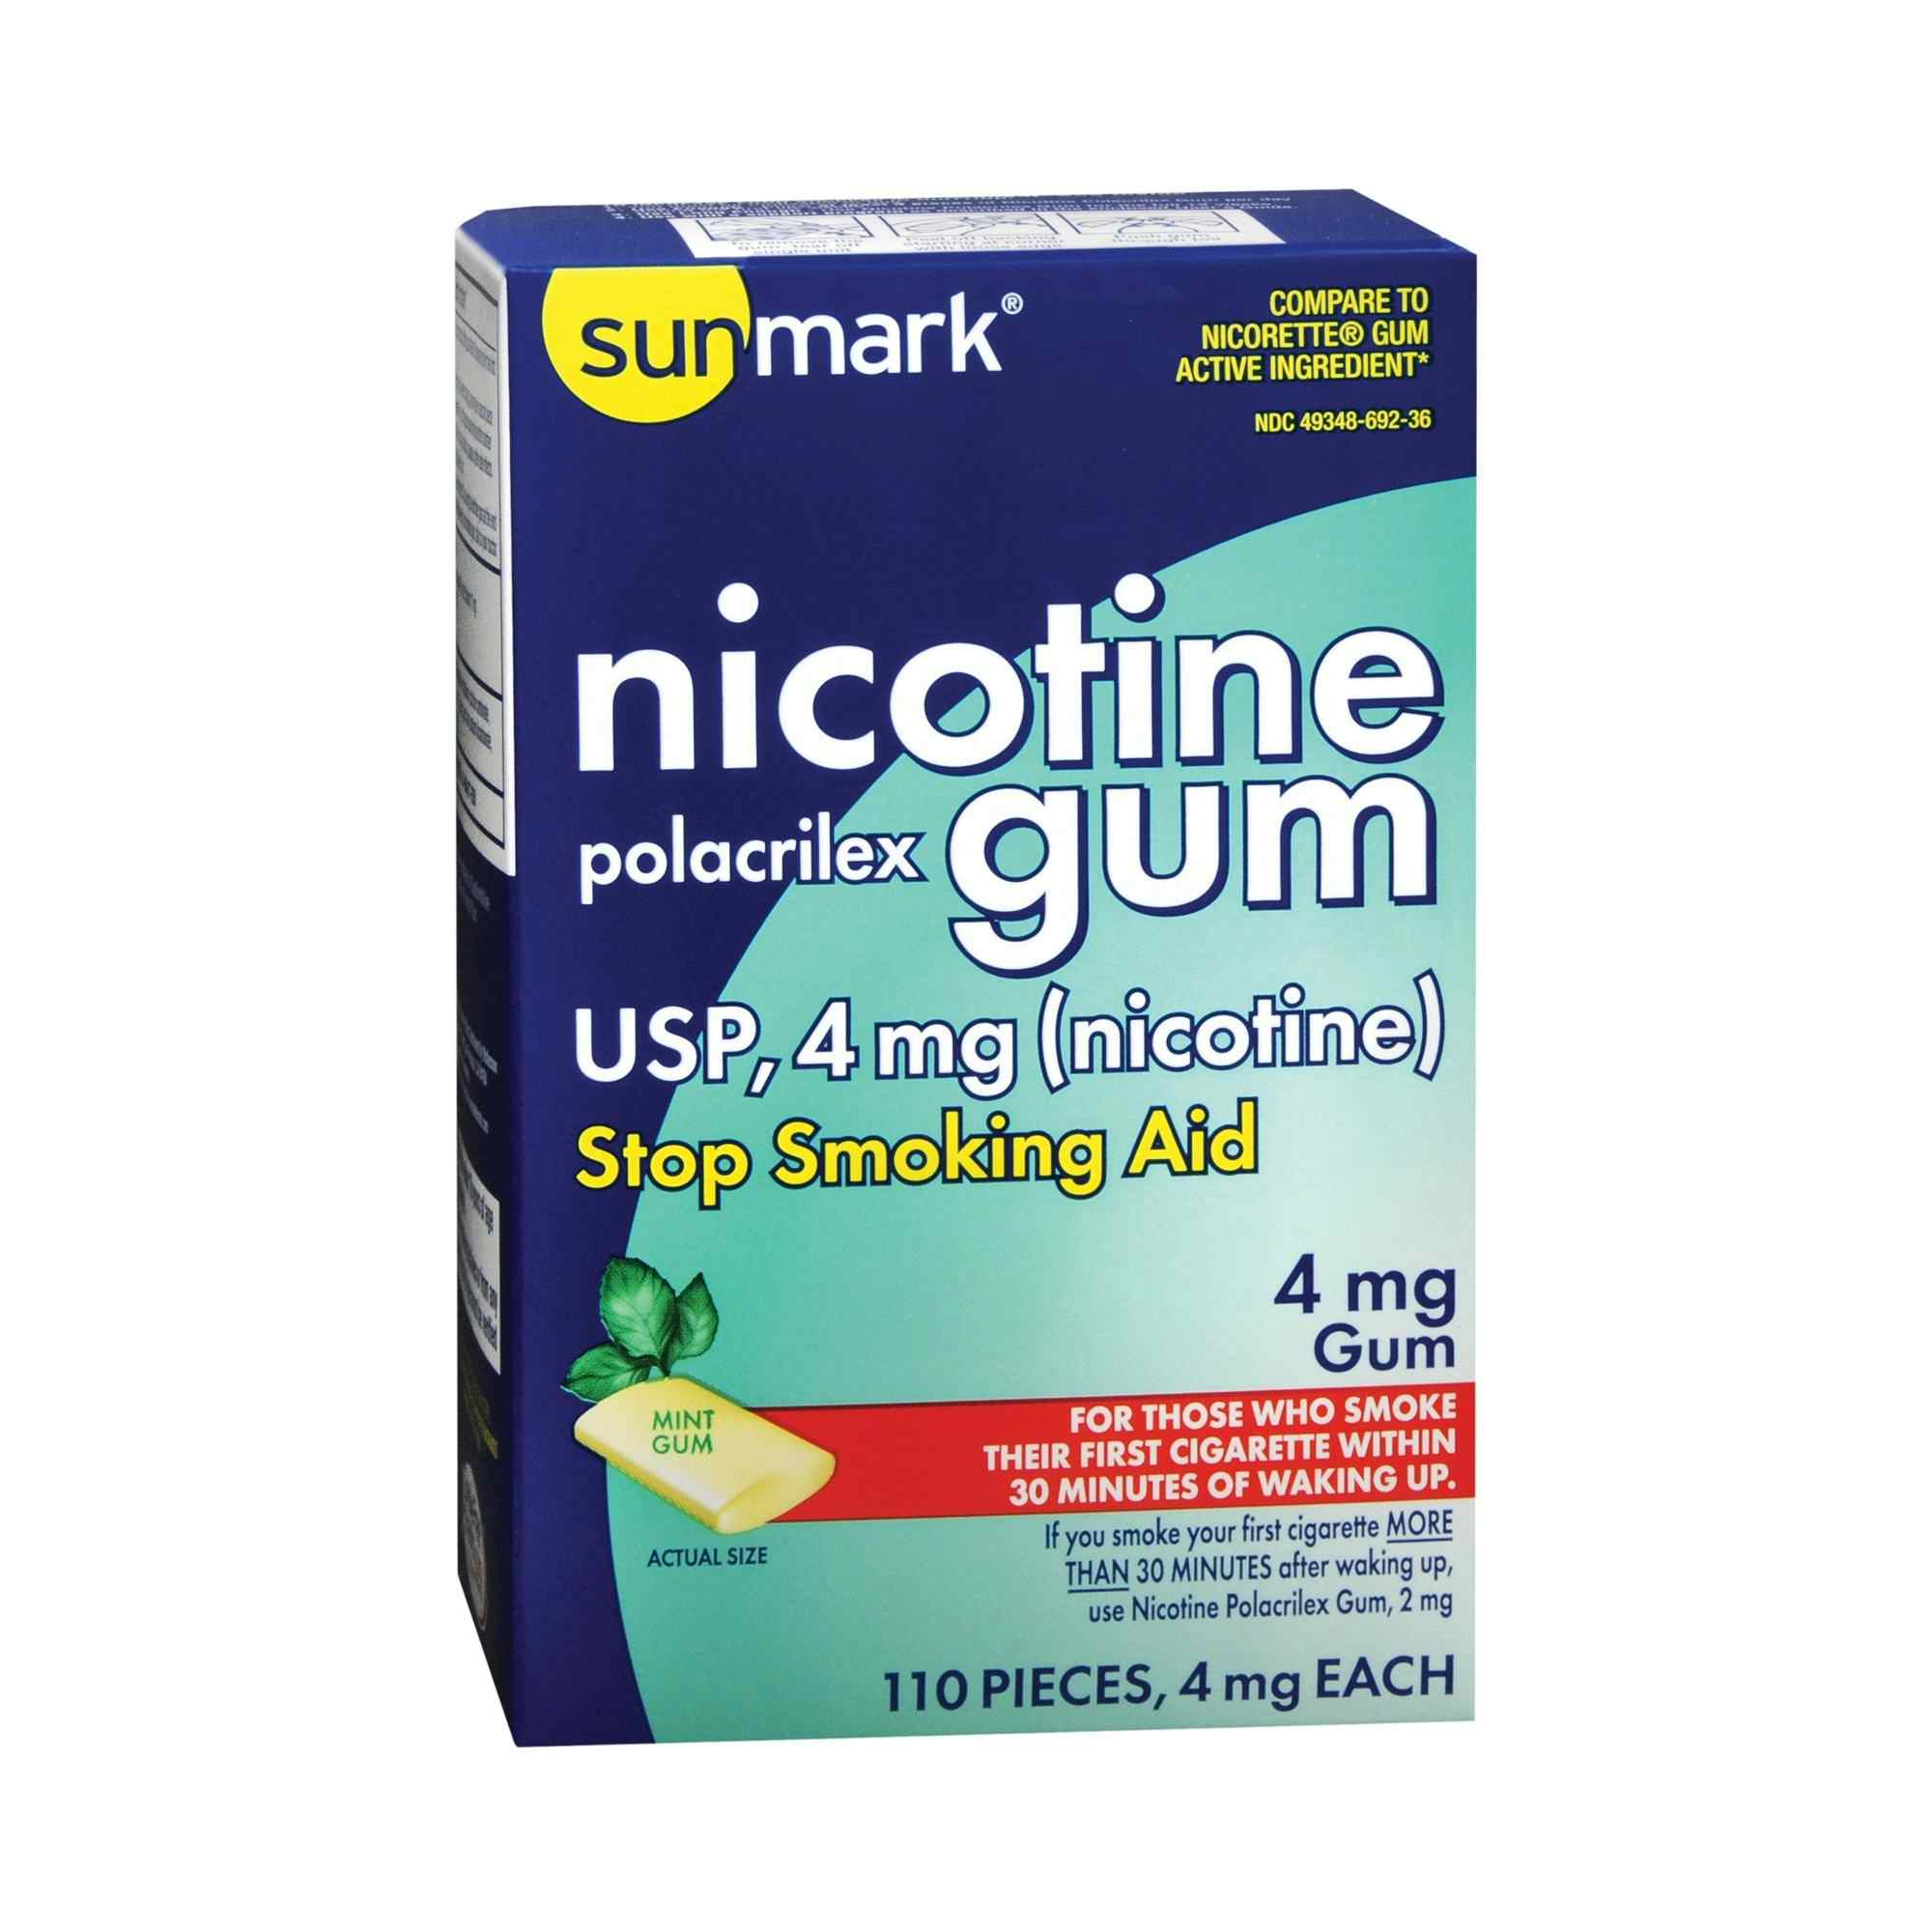 Sunmark Nicotine Gum, 4 mg, 110 Pieces, 49348069236, Mint Flavor - 1 Pack